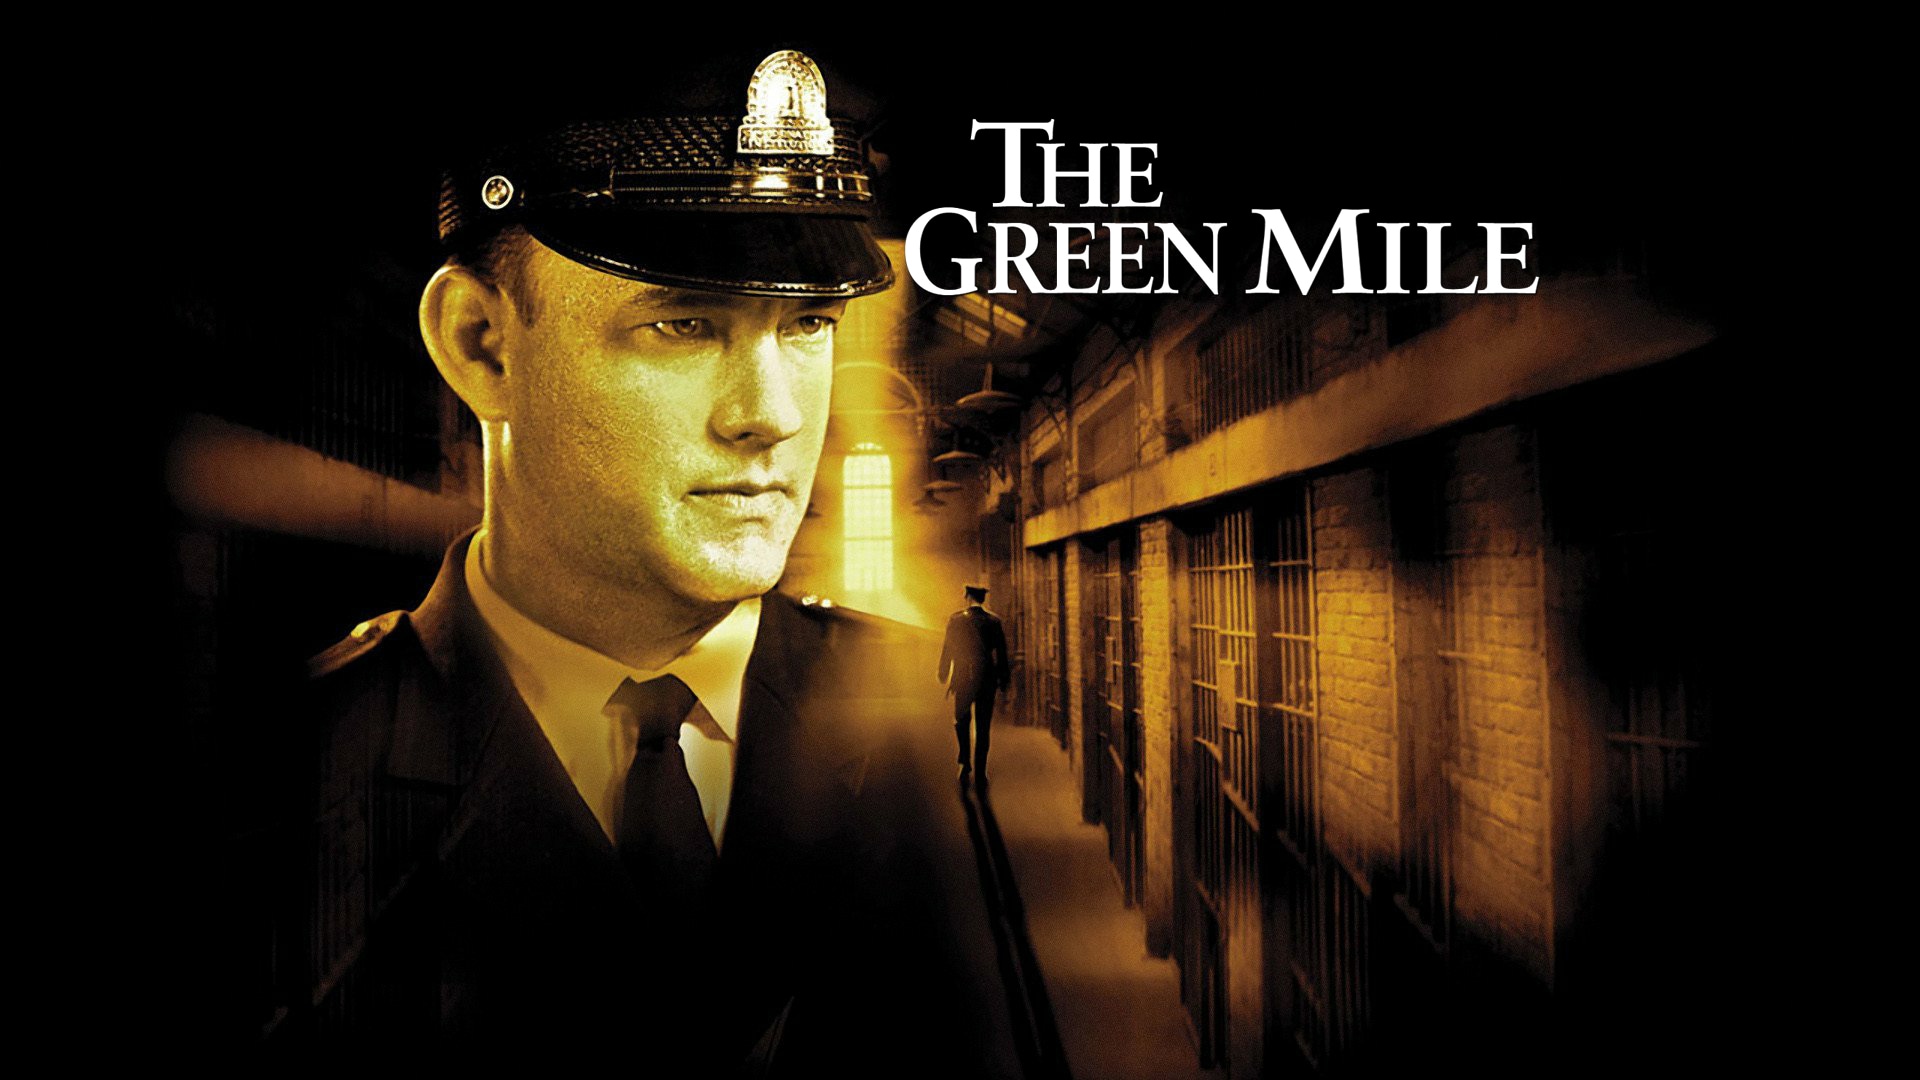 Watch The Green Mile Online | Stream Full Movies